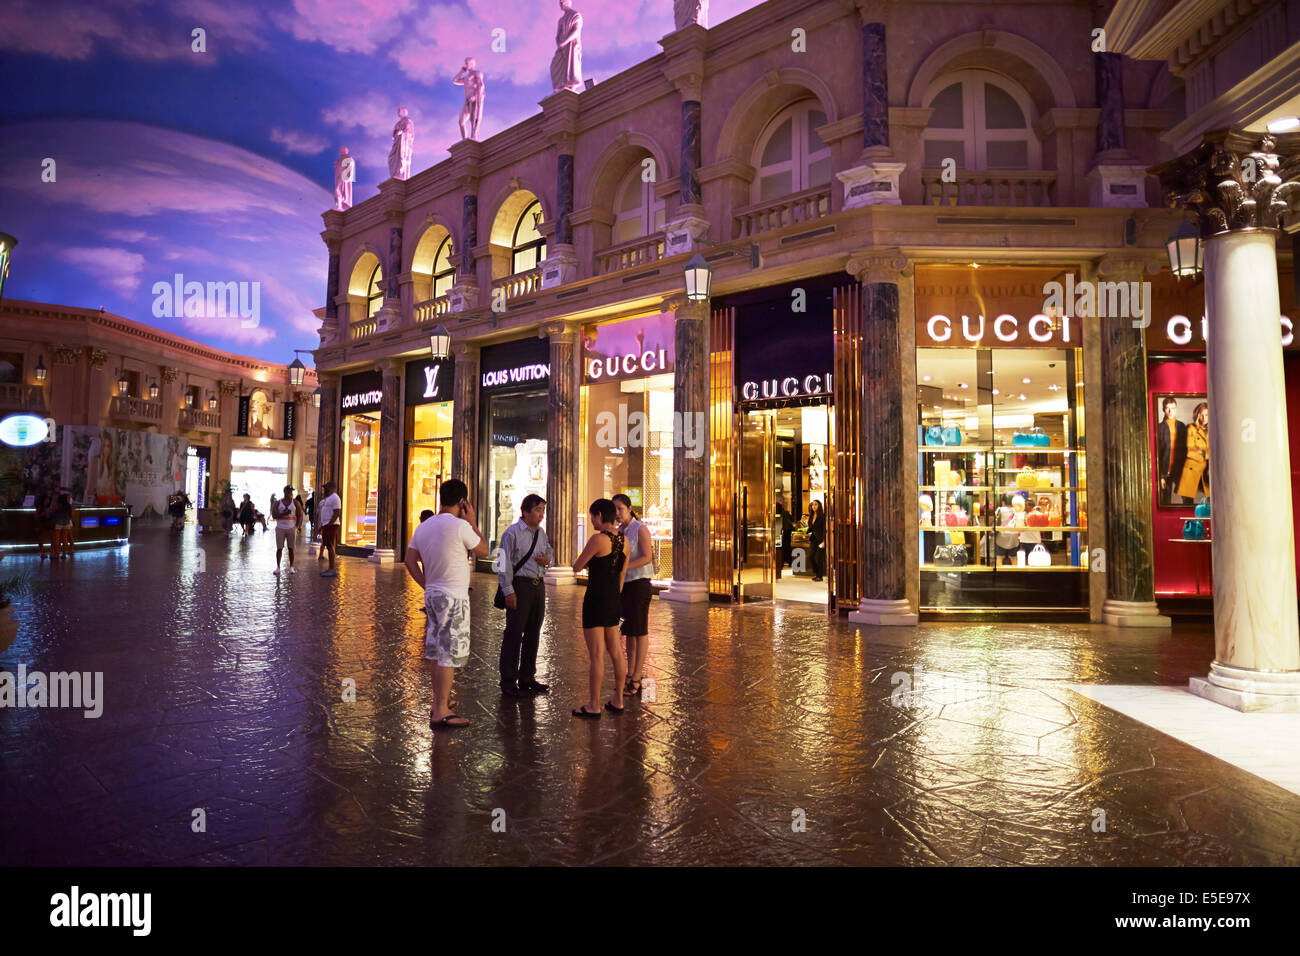 The Forum Shops at Caesars a shopping mall connected to Caesars Stock Photo: 72229358 - Alamy